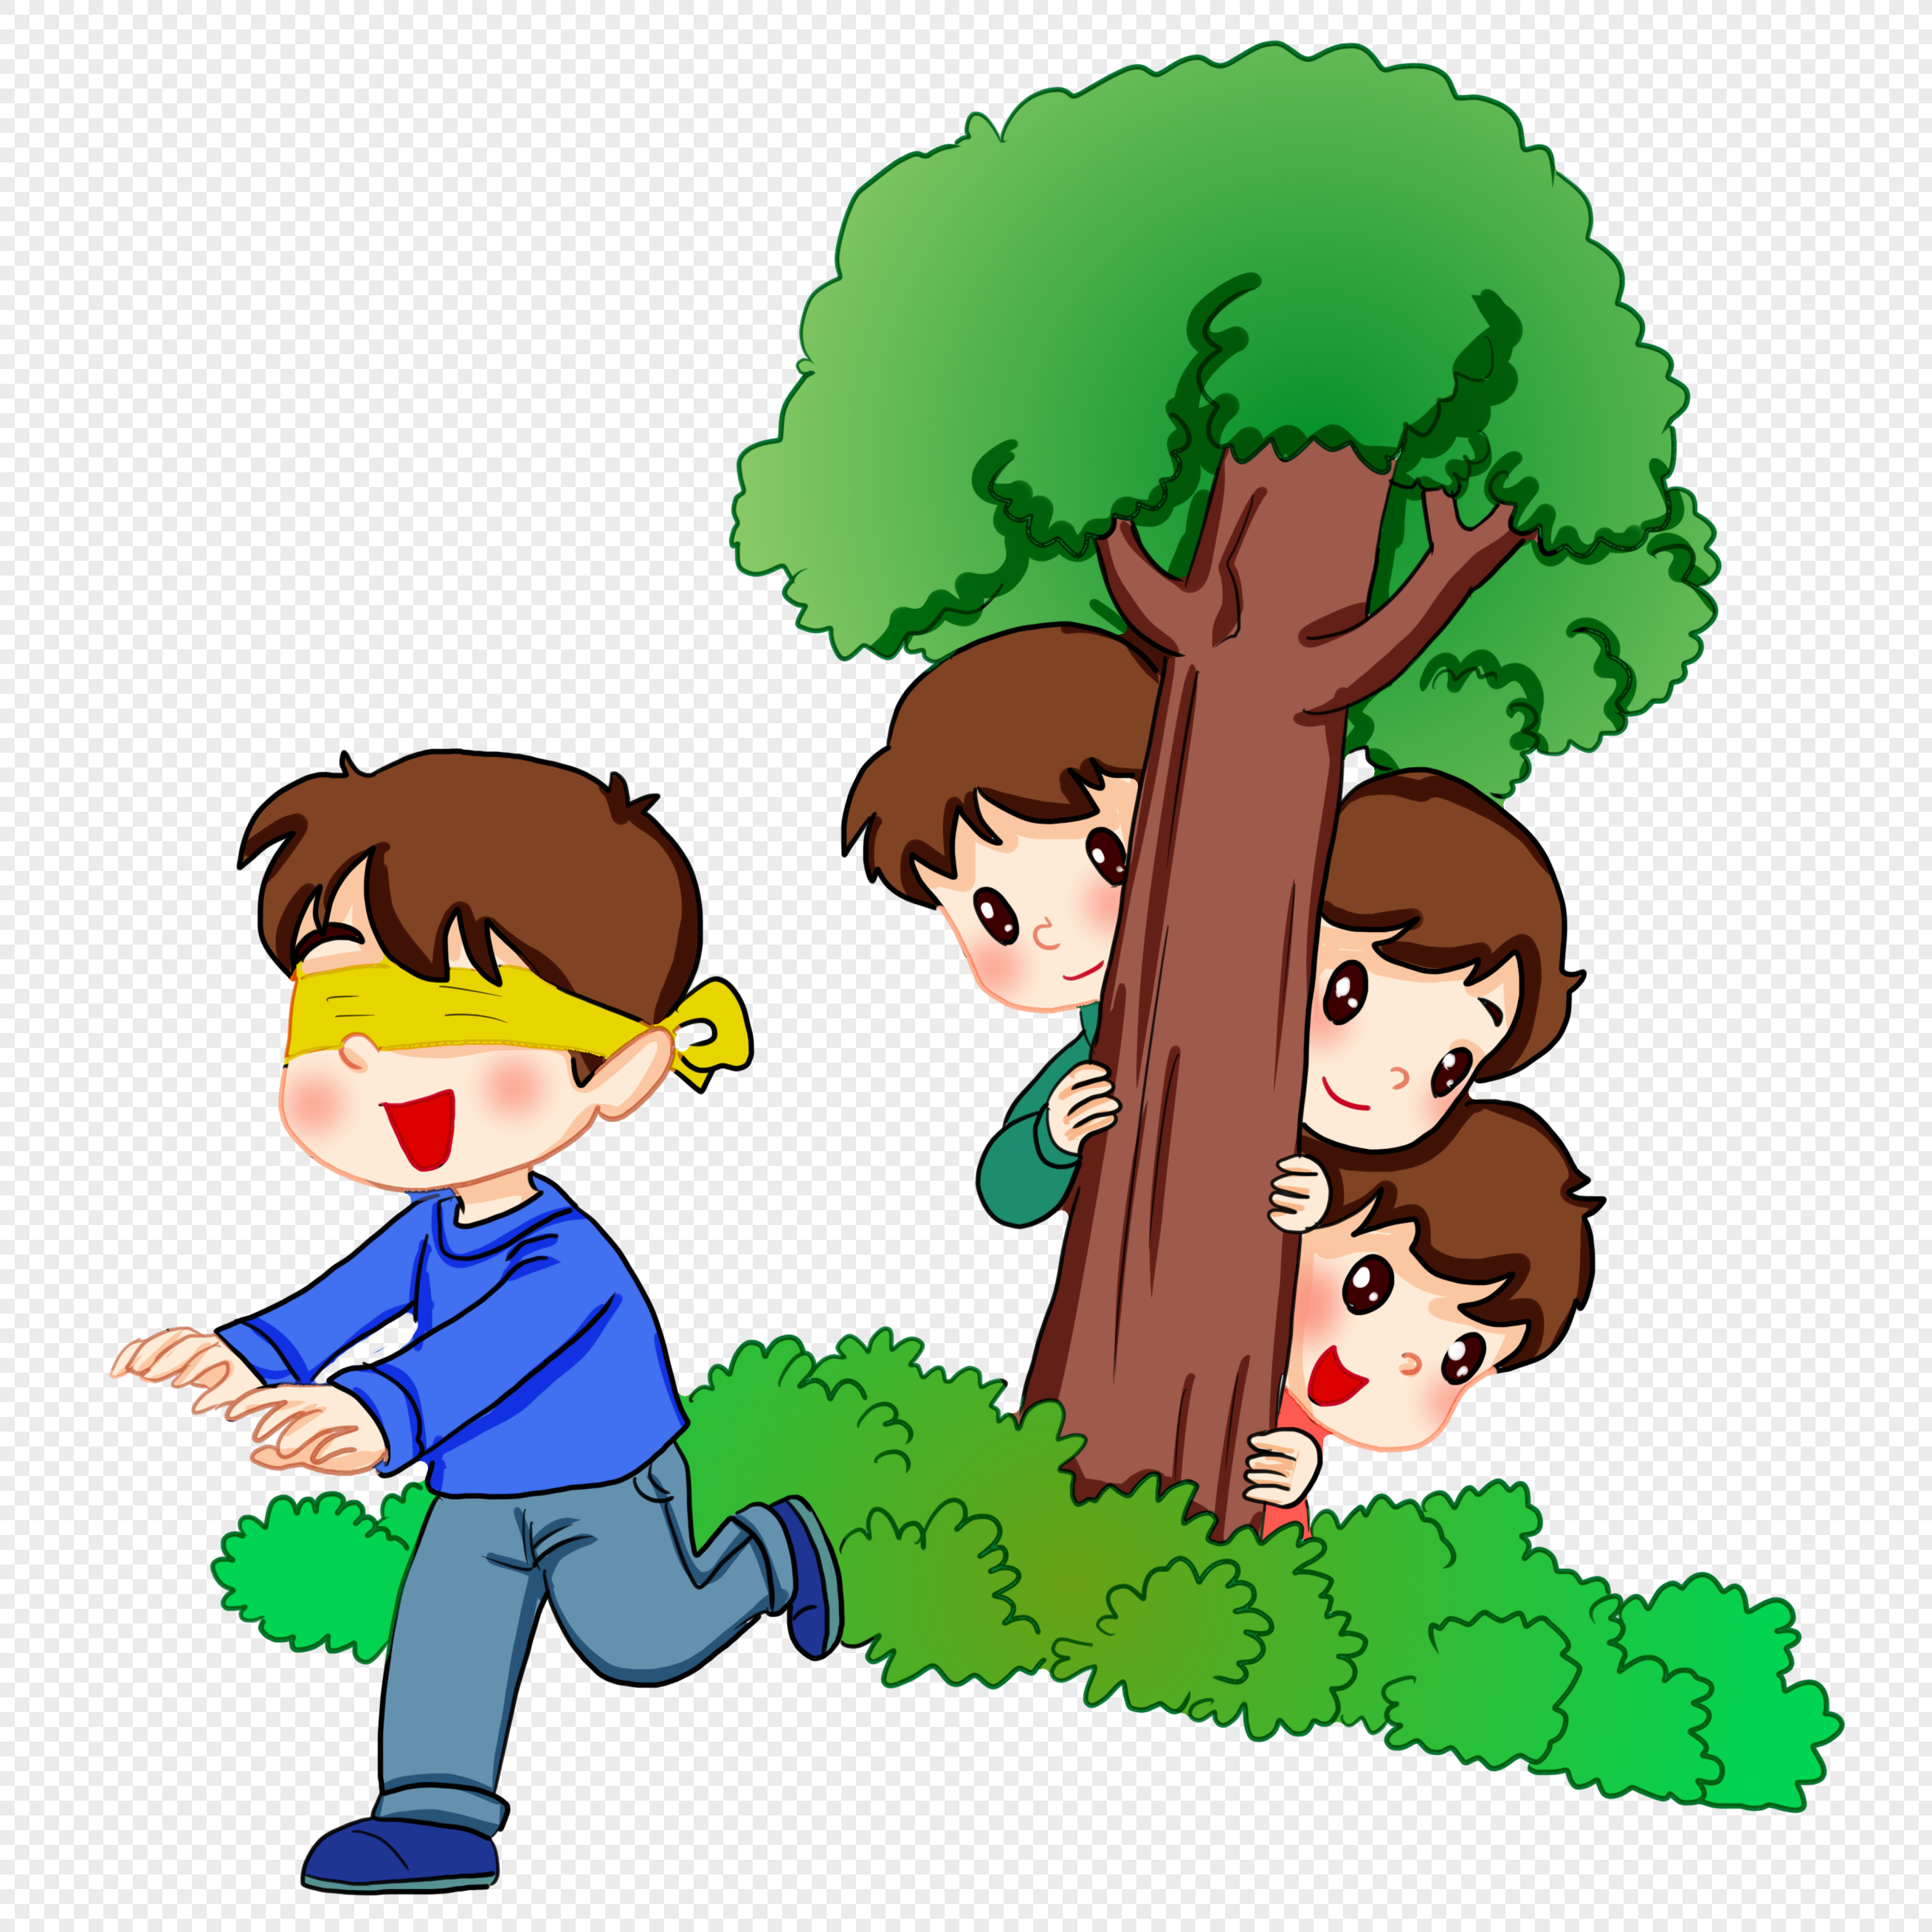 Hide And Seek Children Png Imagepicture Free Download 401516450